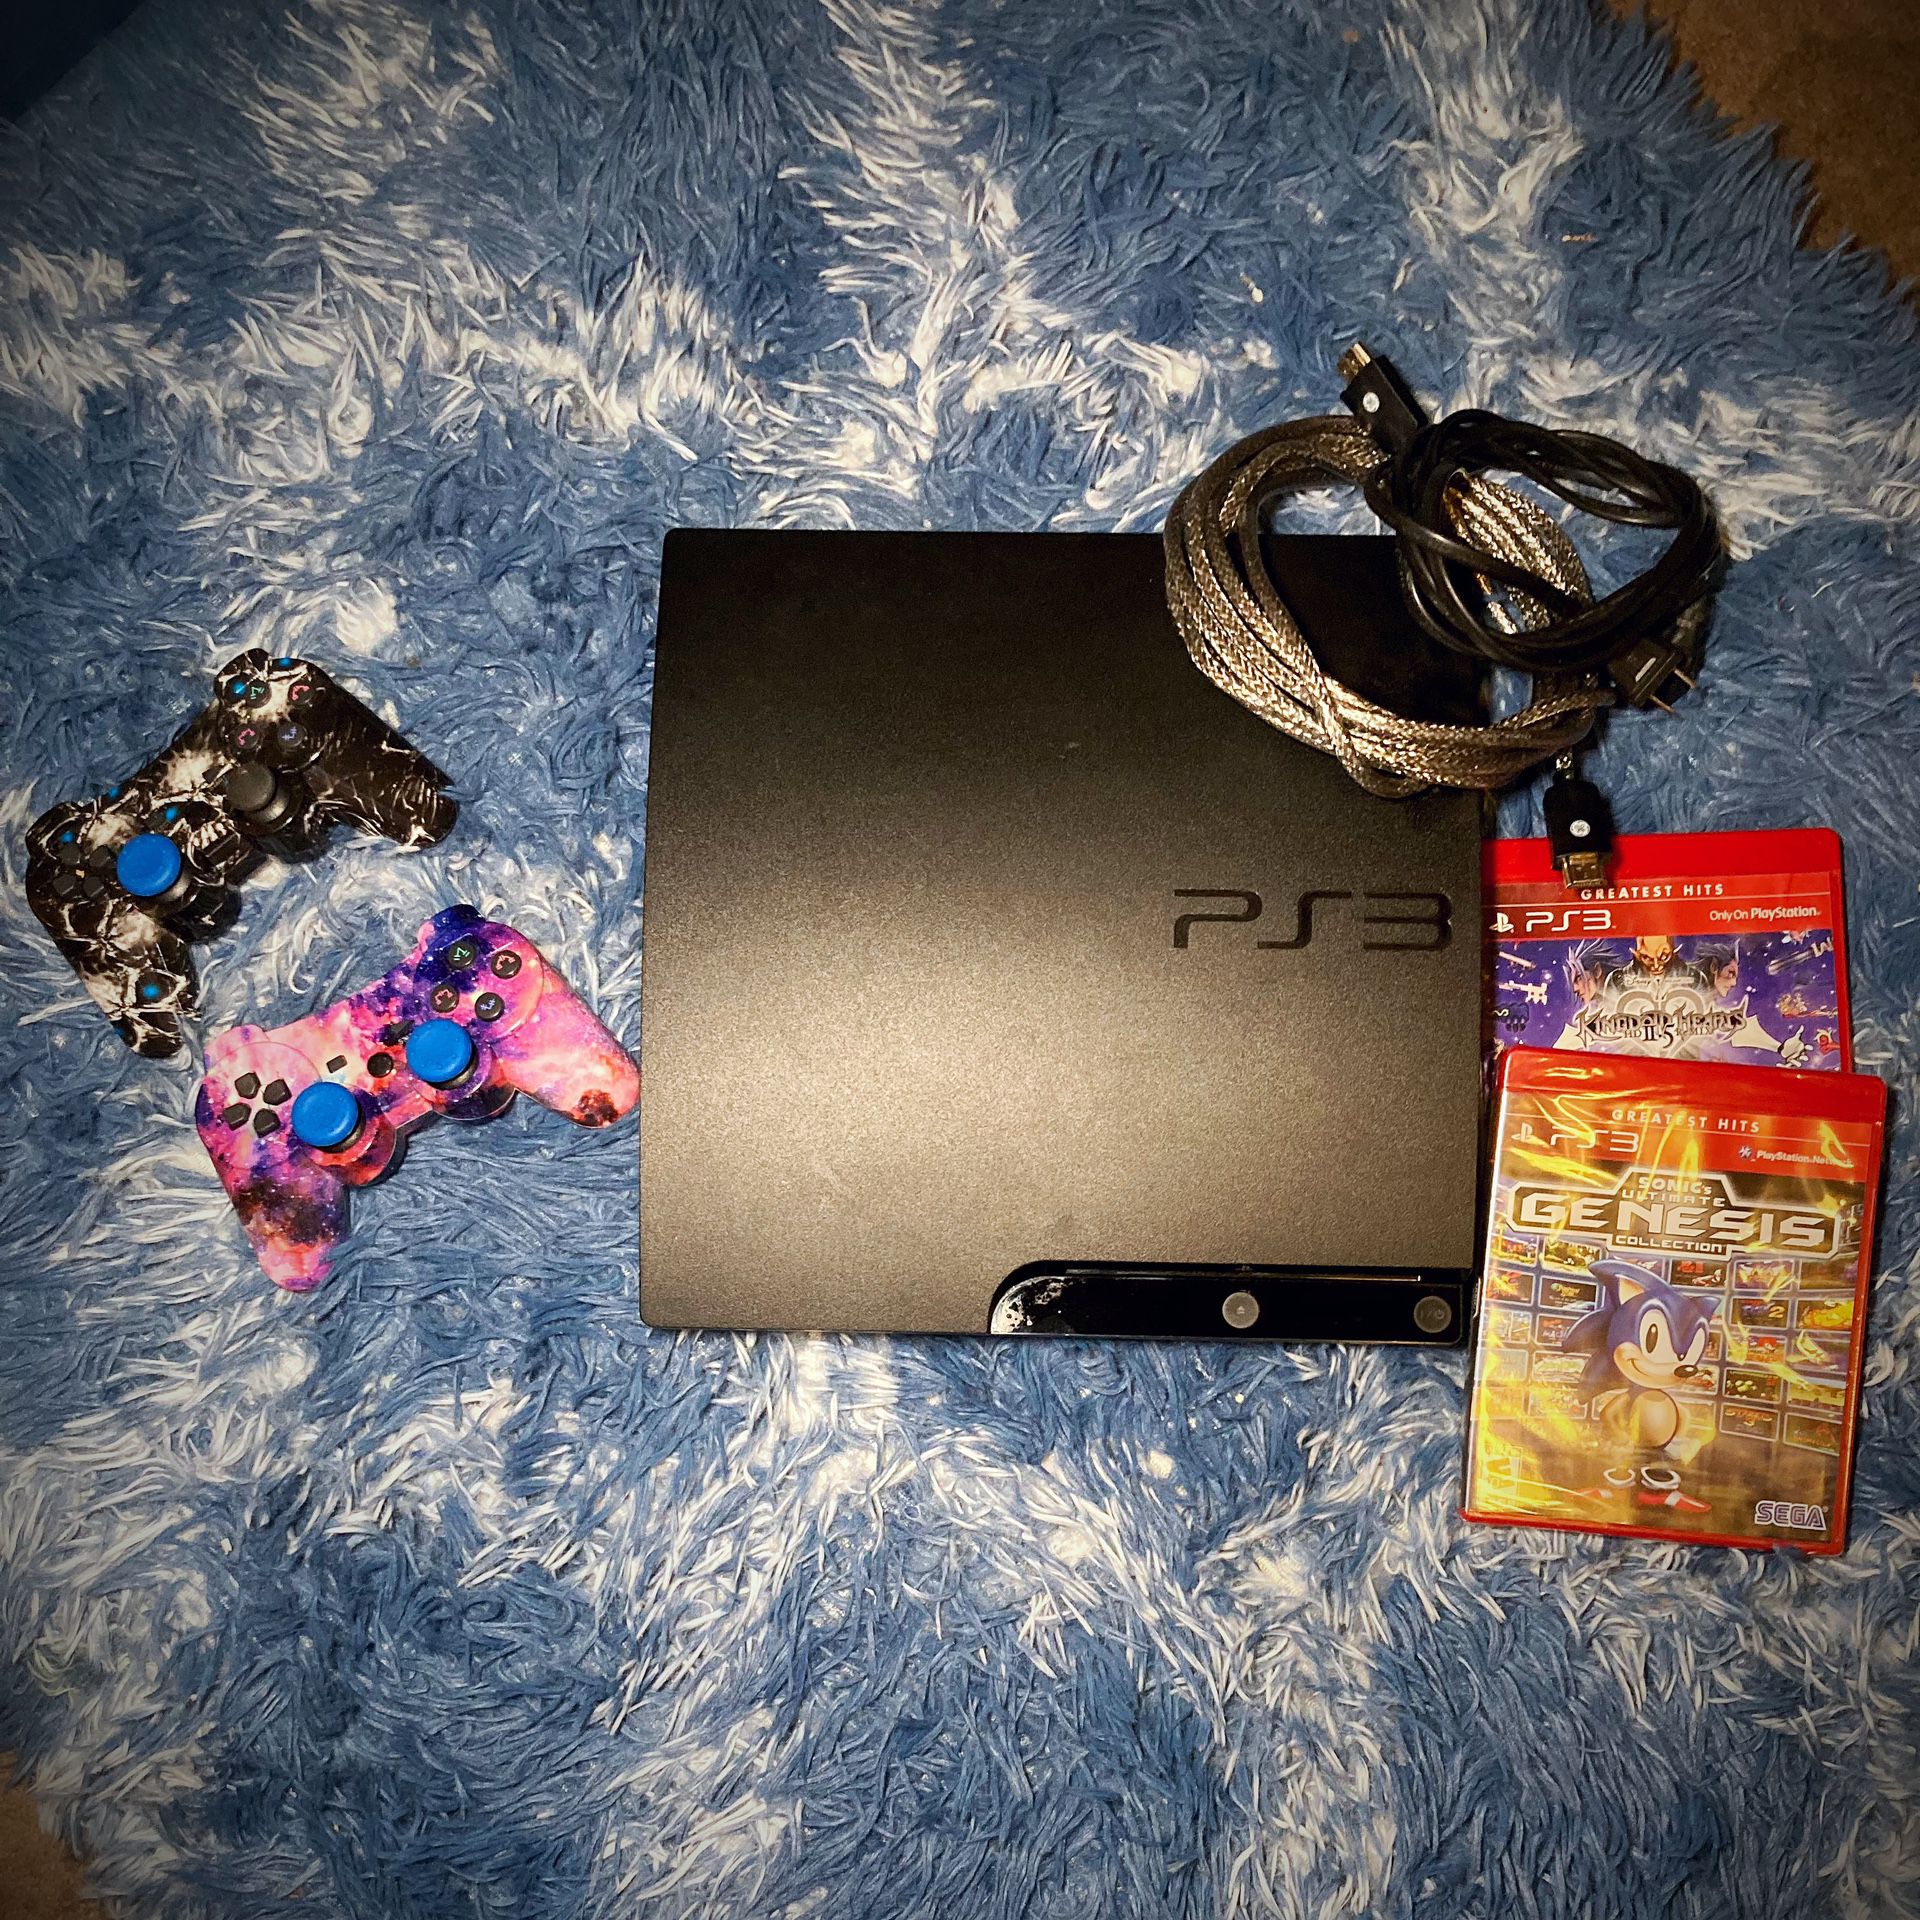 PlayStation 3 Slim 320GB With Everything Pictured